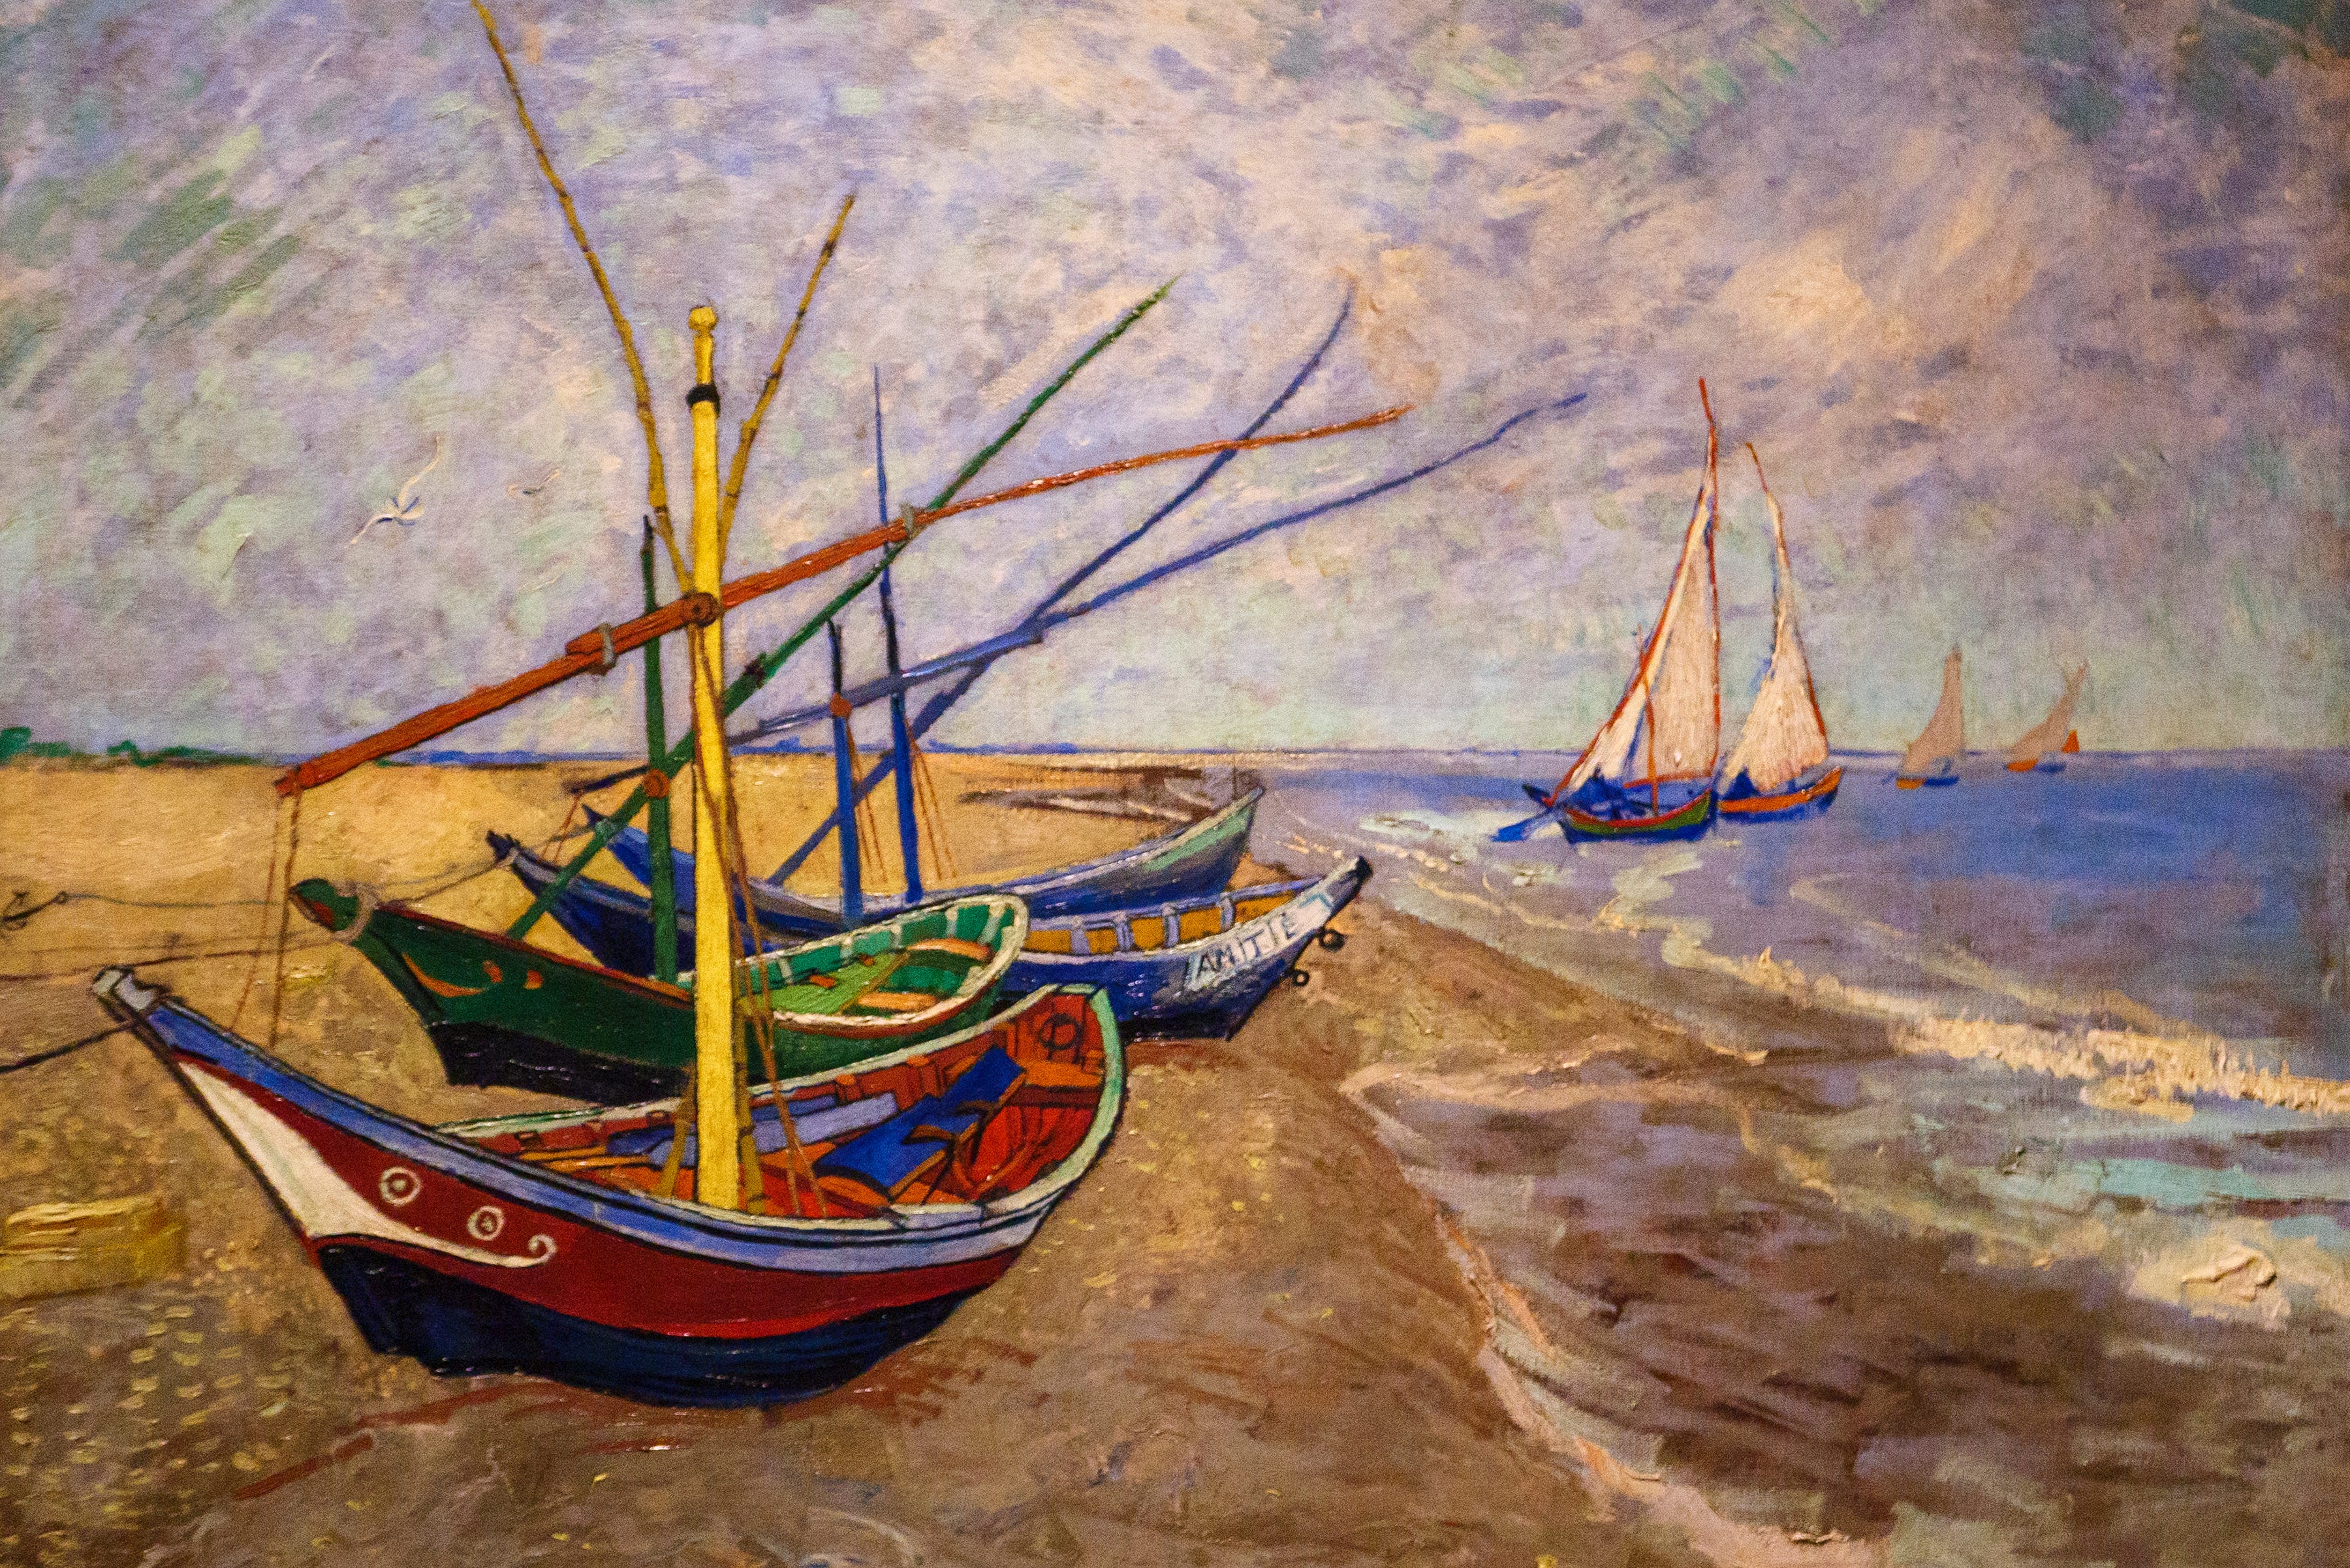 A close up look at Fishing Boats on the Beach at Les Saints-Maries-de-la-Mer, 1888, at the Van Gogh in America exhibit at the Detroit institute of Arts, Wednesday, Jan. 11, 2023.